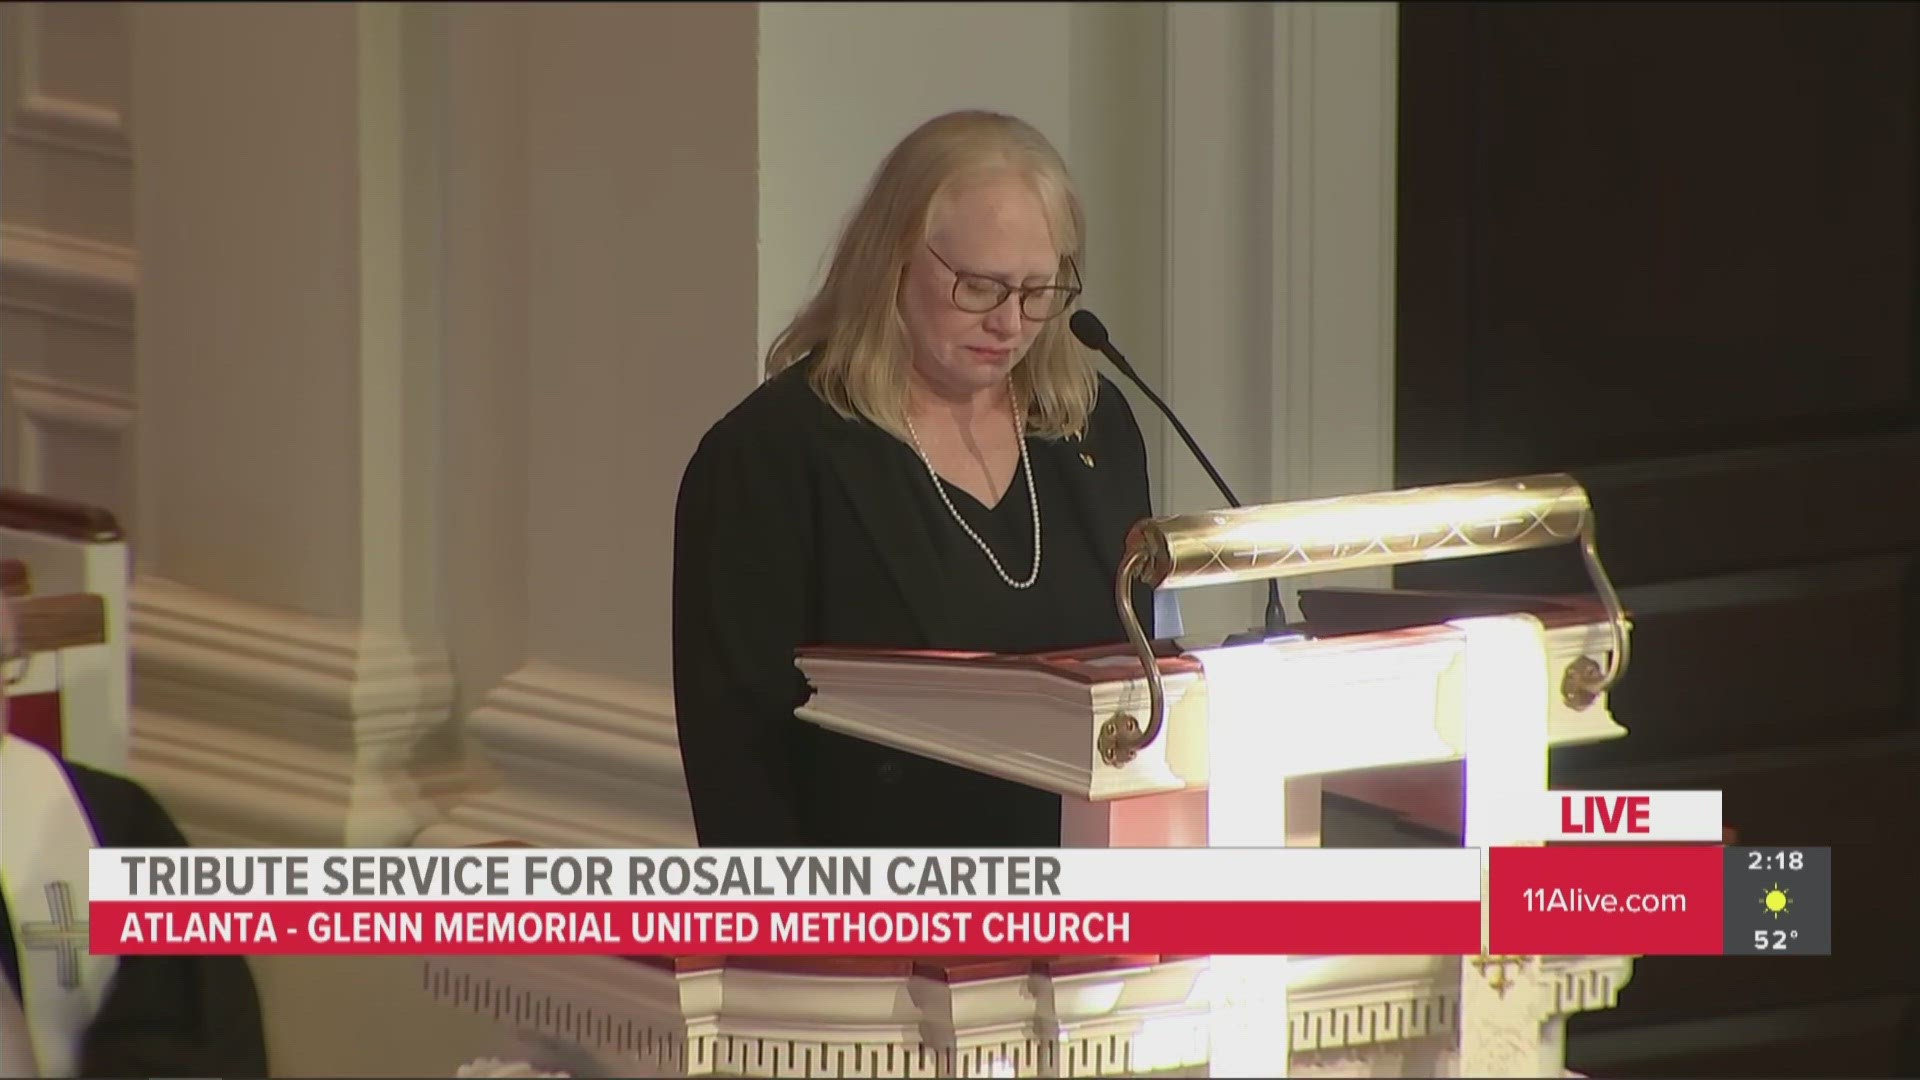 Amy Carter read a note her father, Jimmy Carter, wrote to the love his life.